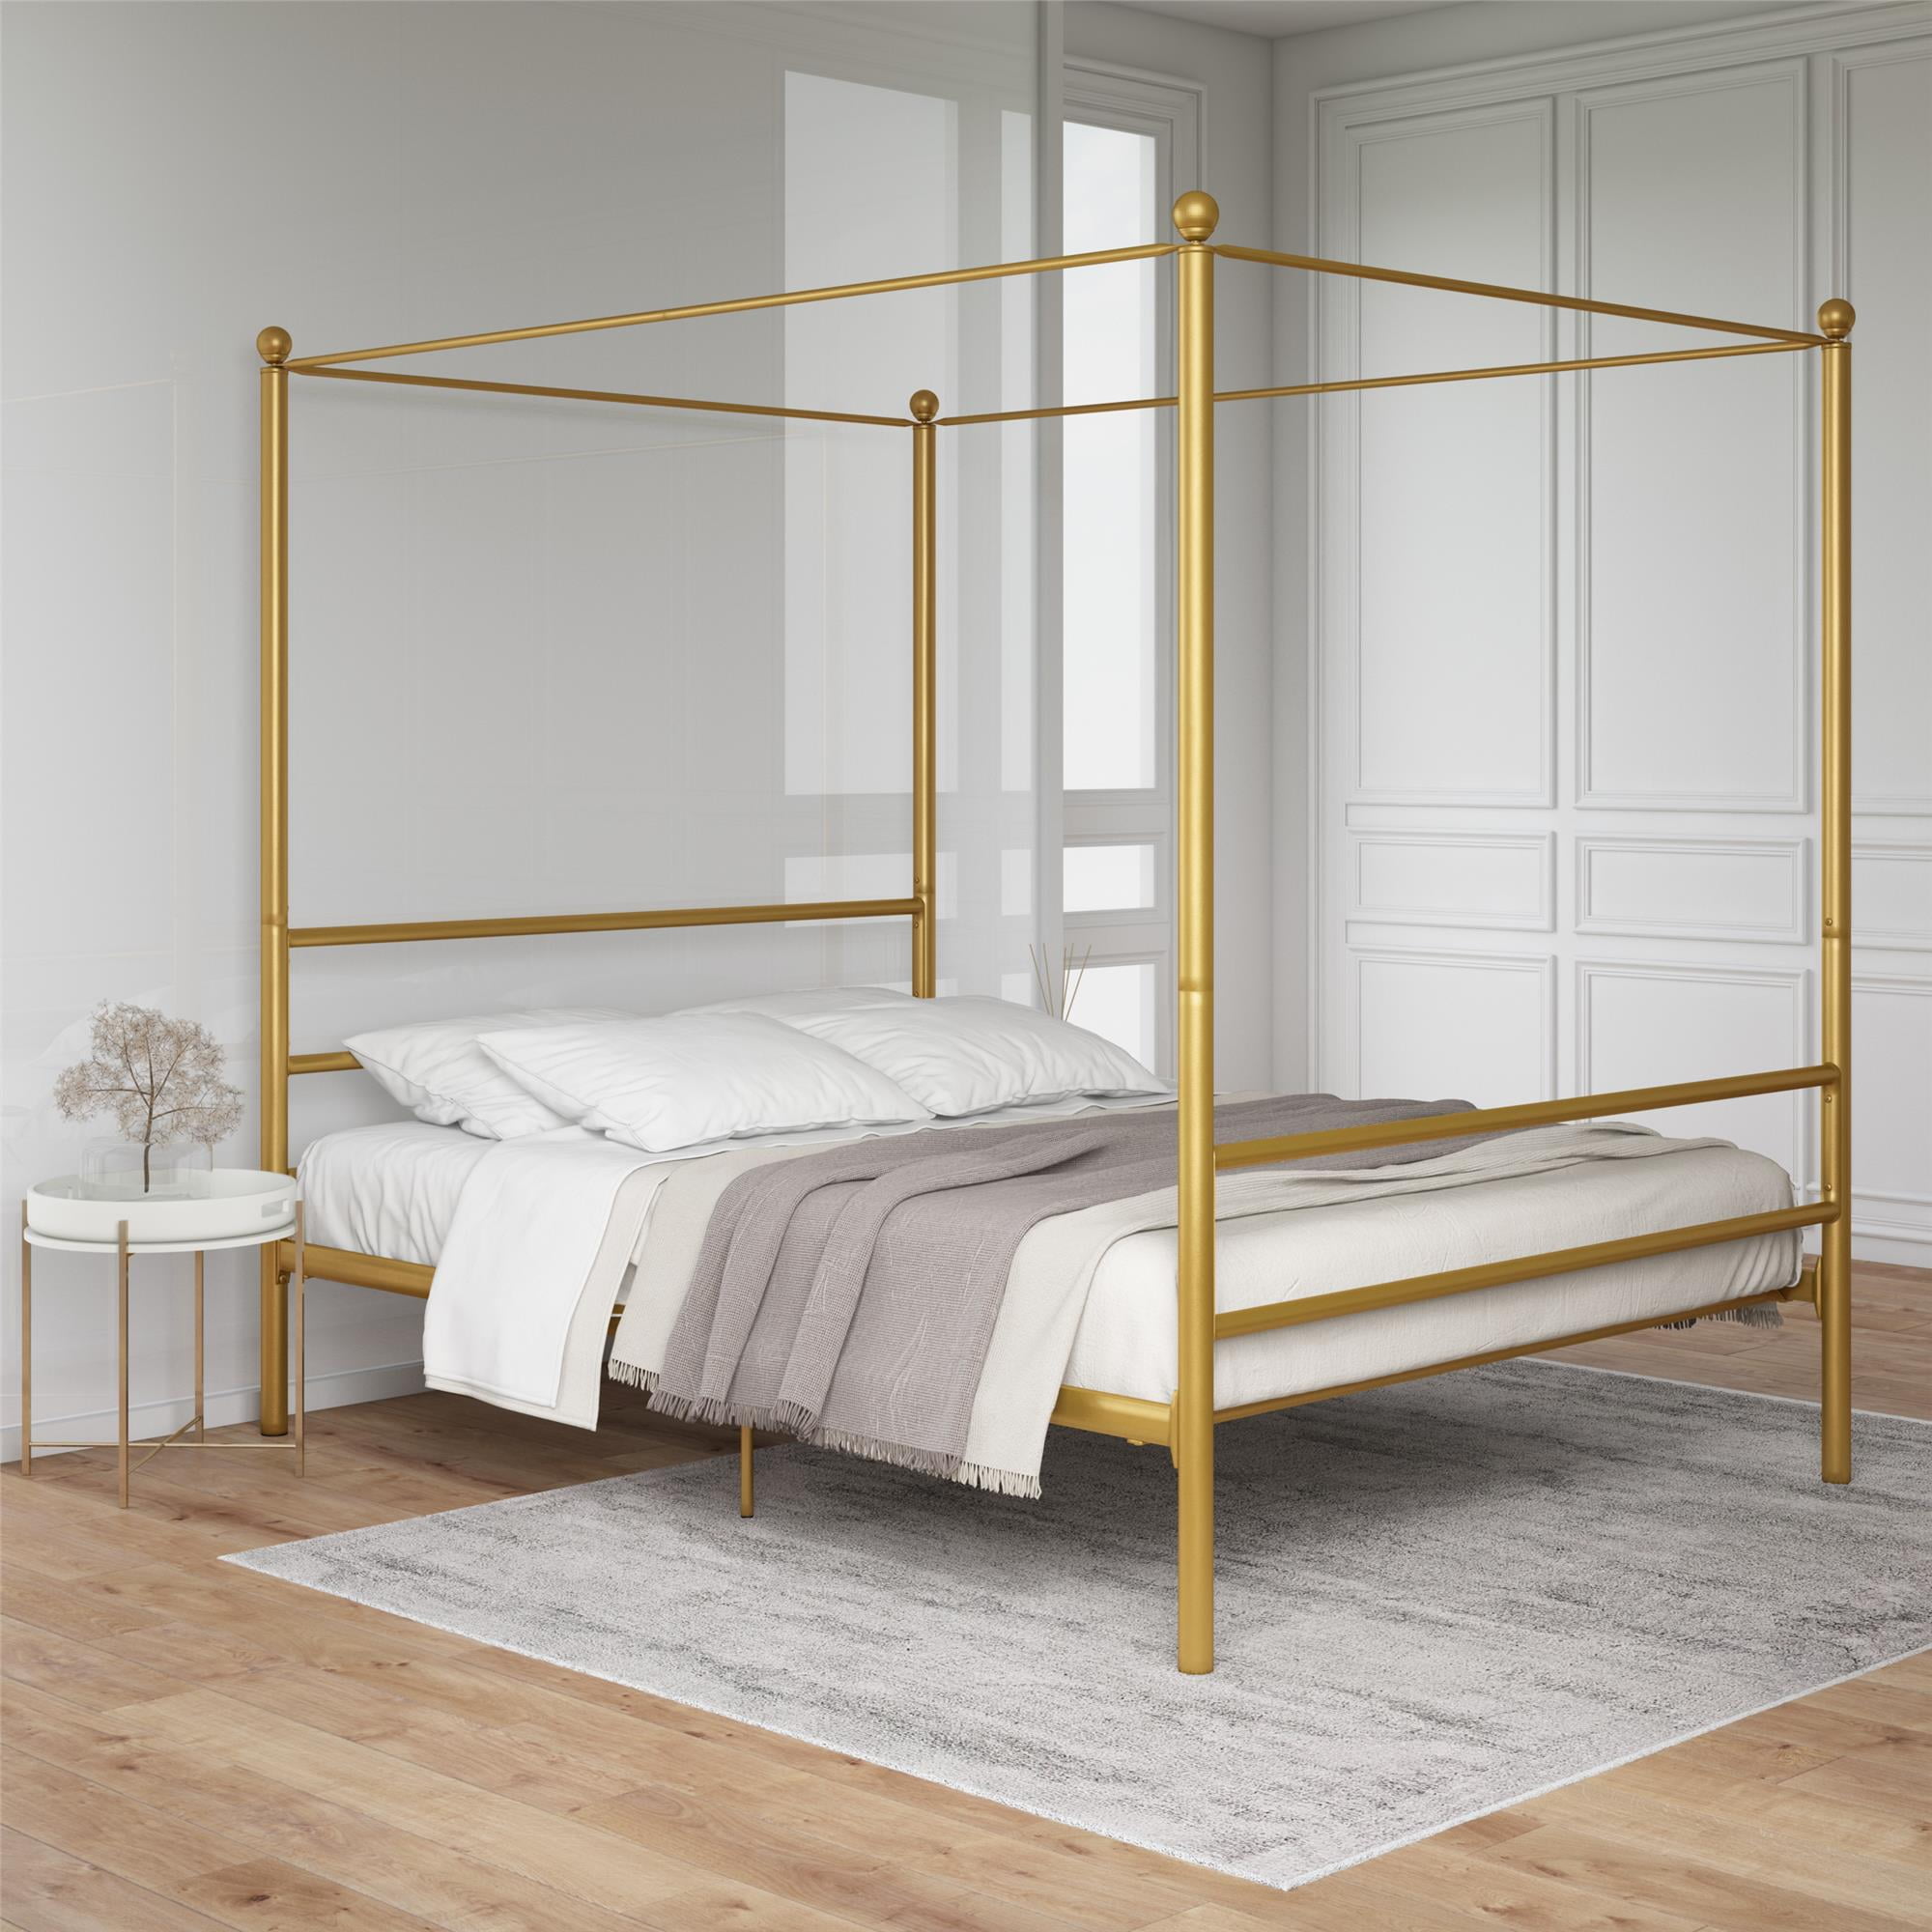 Mainstays Metal Canopy Bed Gold, Gold Iron Bed Frame Queen